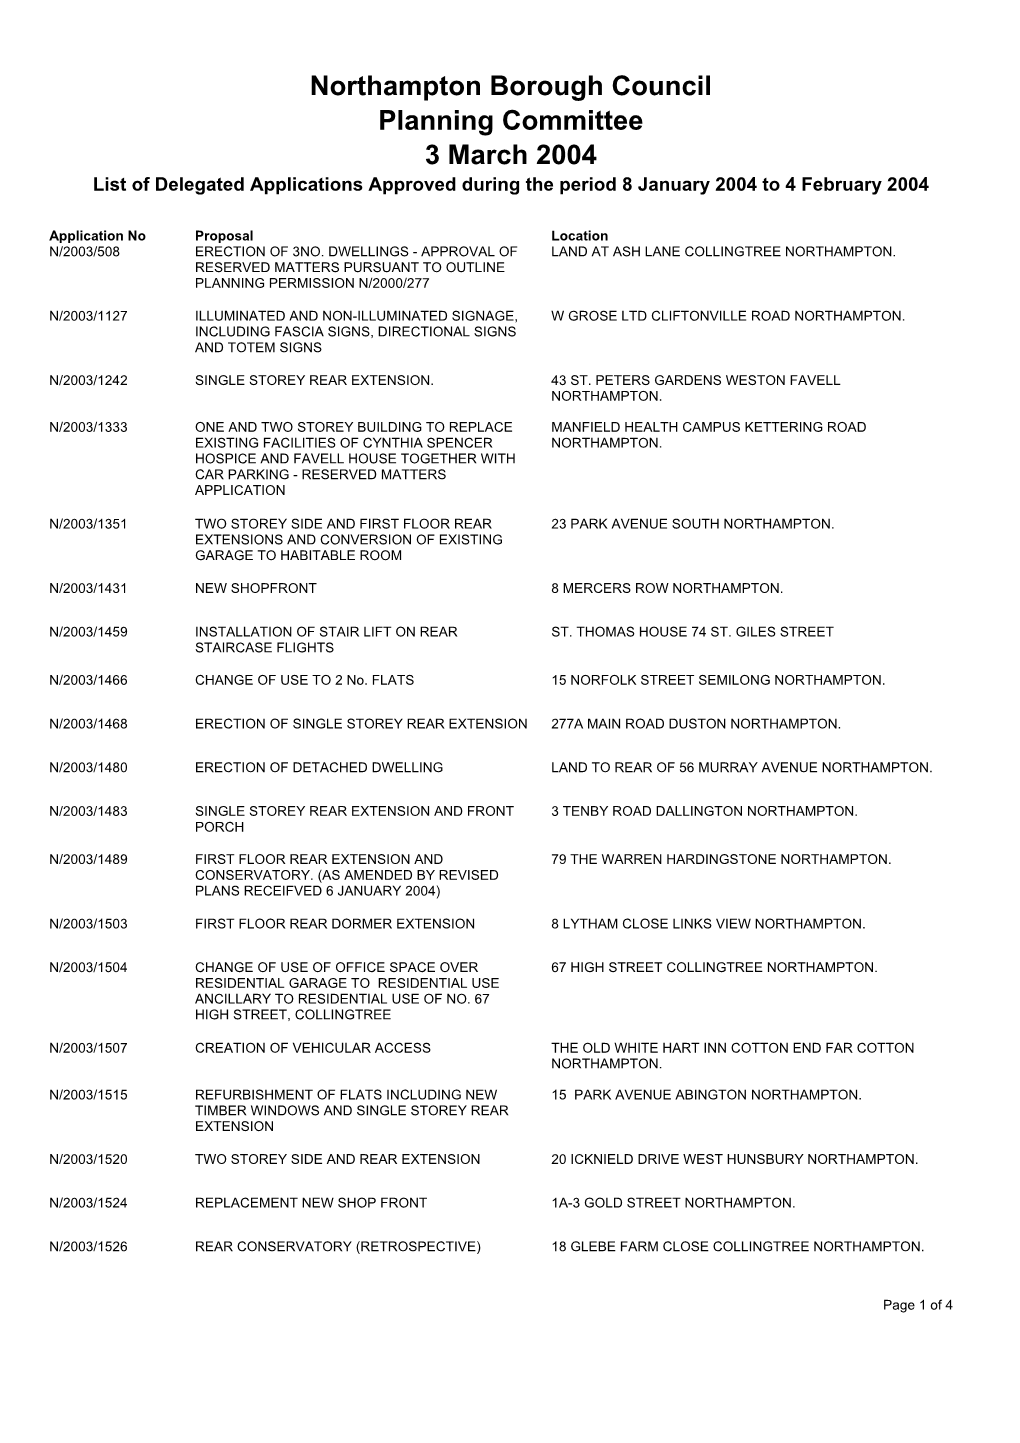 Northampton Borough Council Planning Committee 3 March 2004 List of Delegated Applications Approved During the Period 8 January 2004 to 4 February 2004